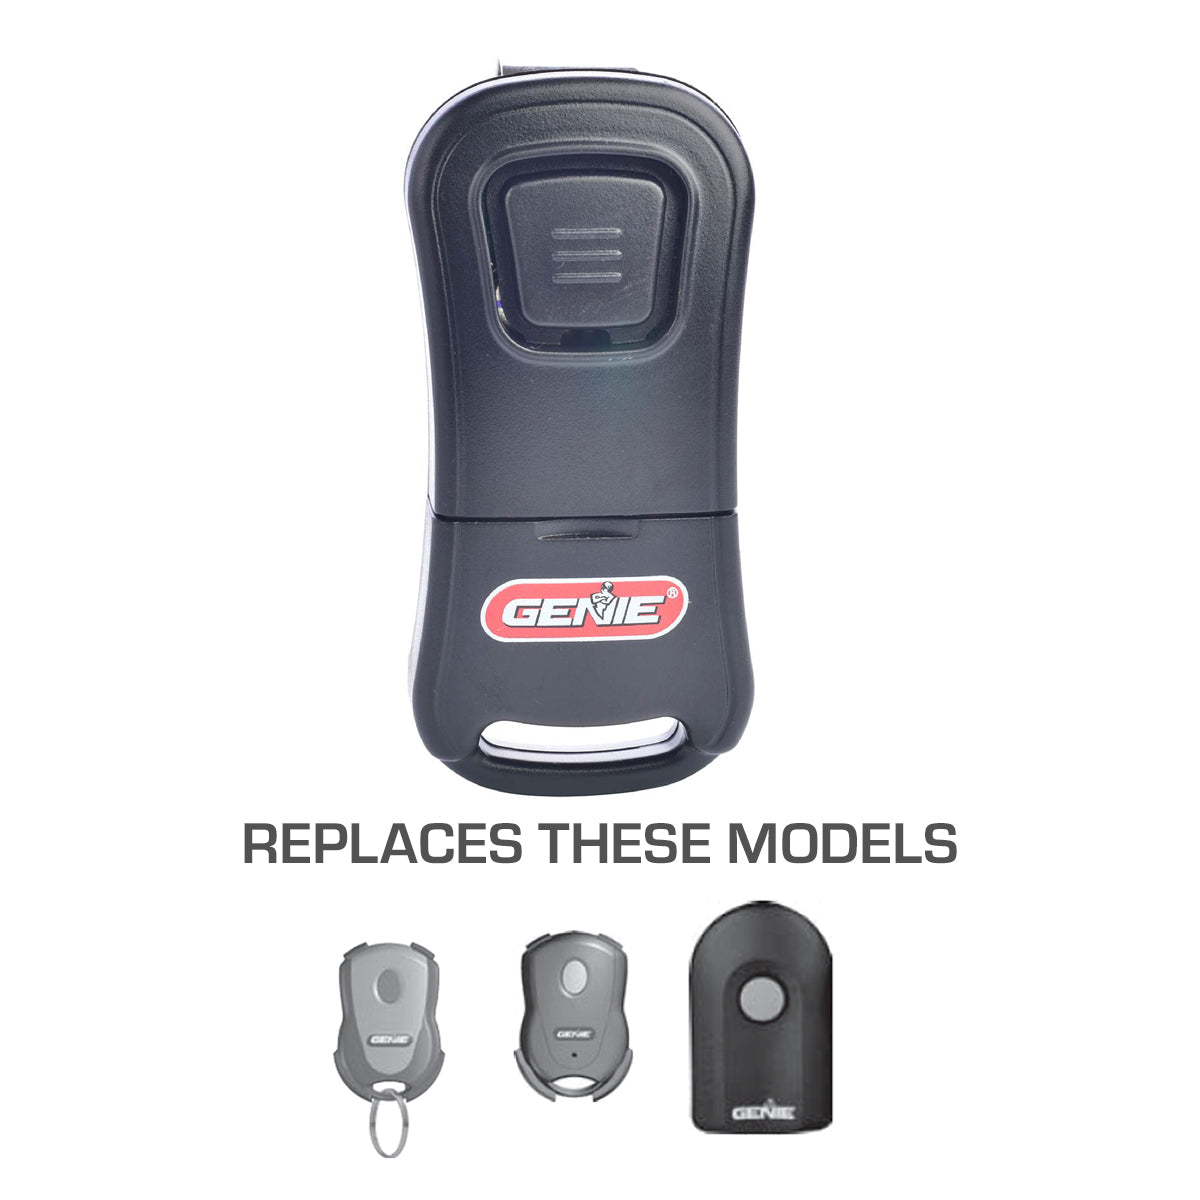 Genie new G1T-BX garage door opener remote replaces old style remotes